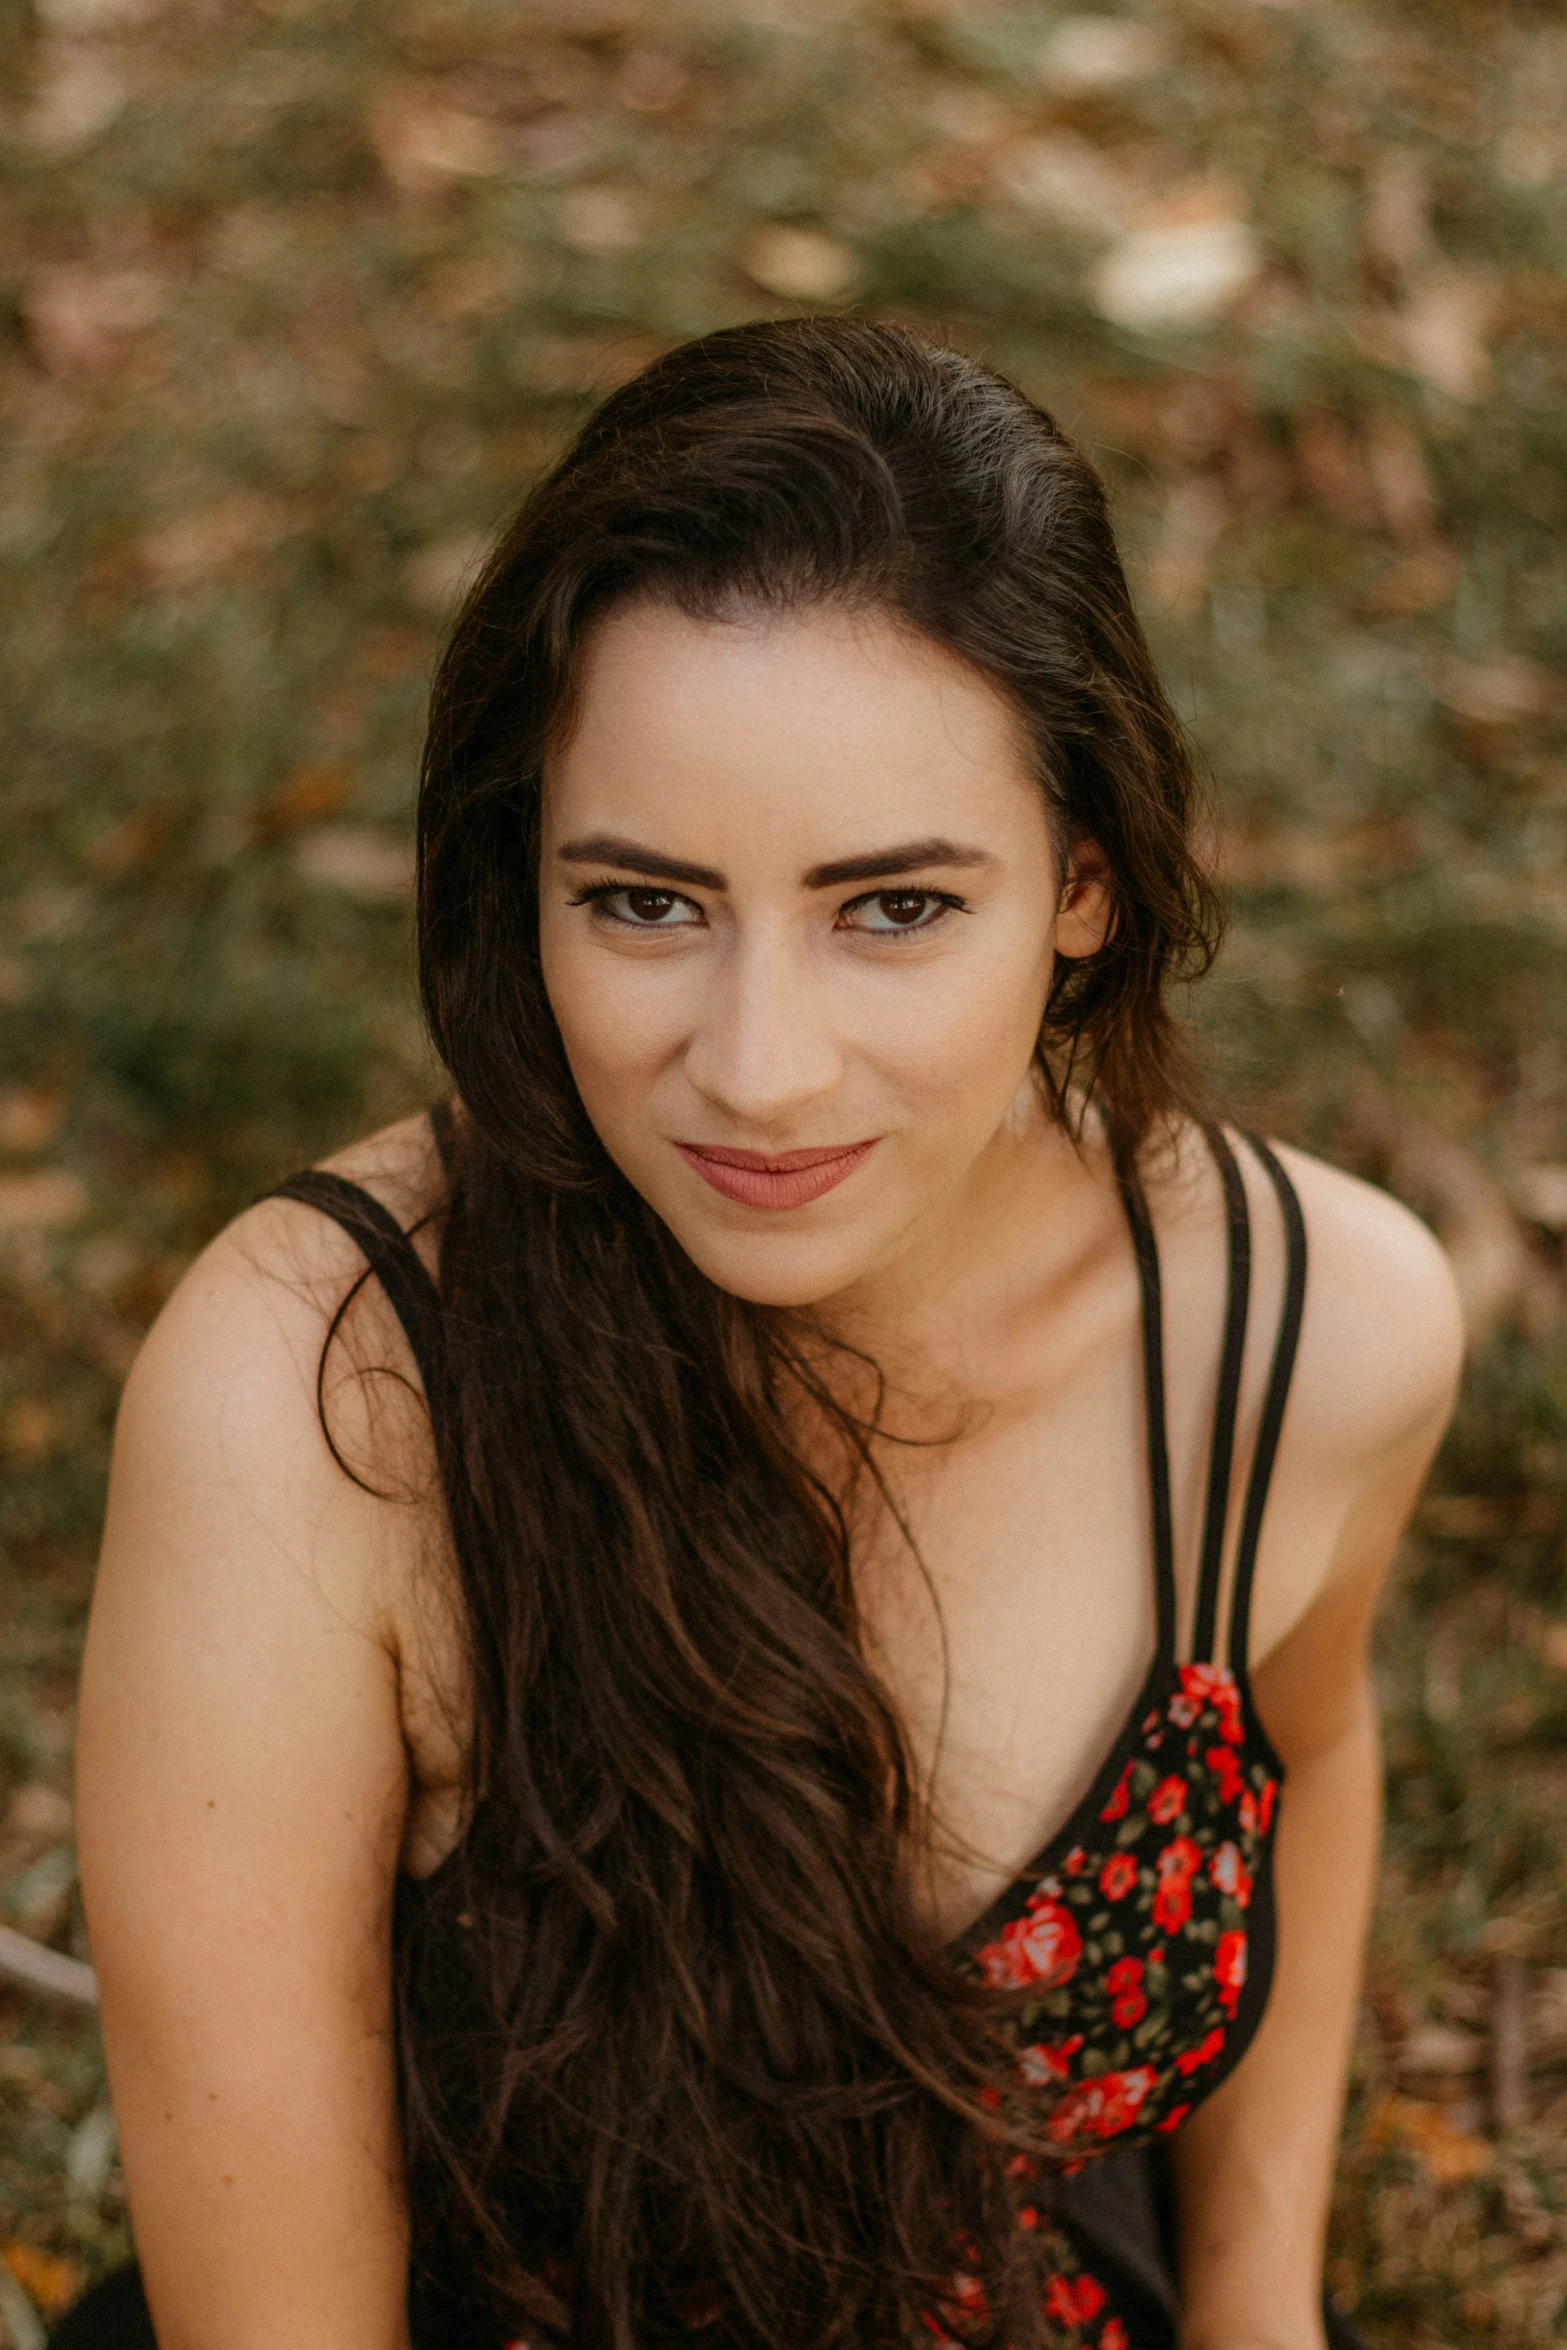 a  wearing a black tank top sitting in the grass